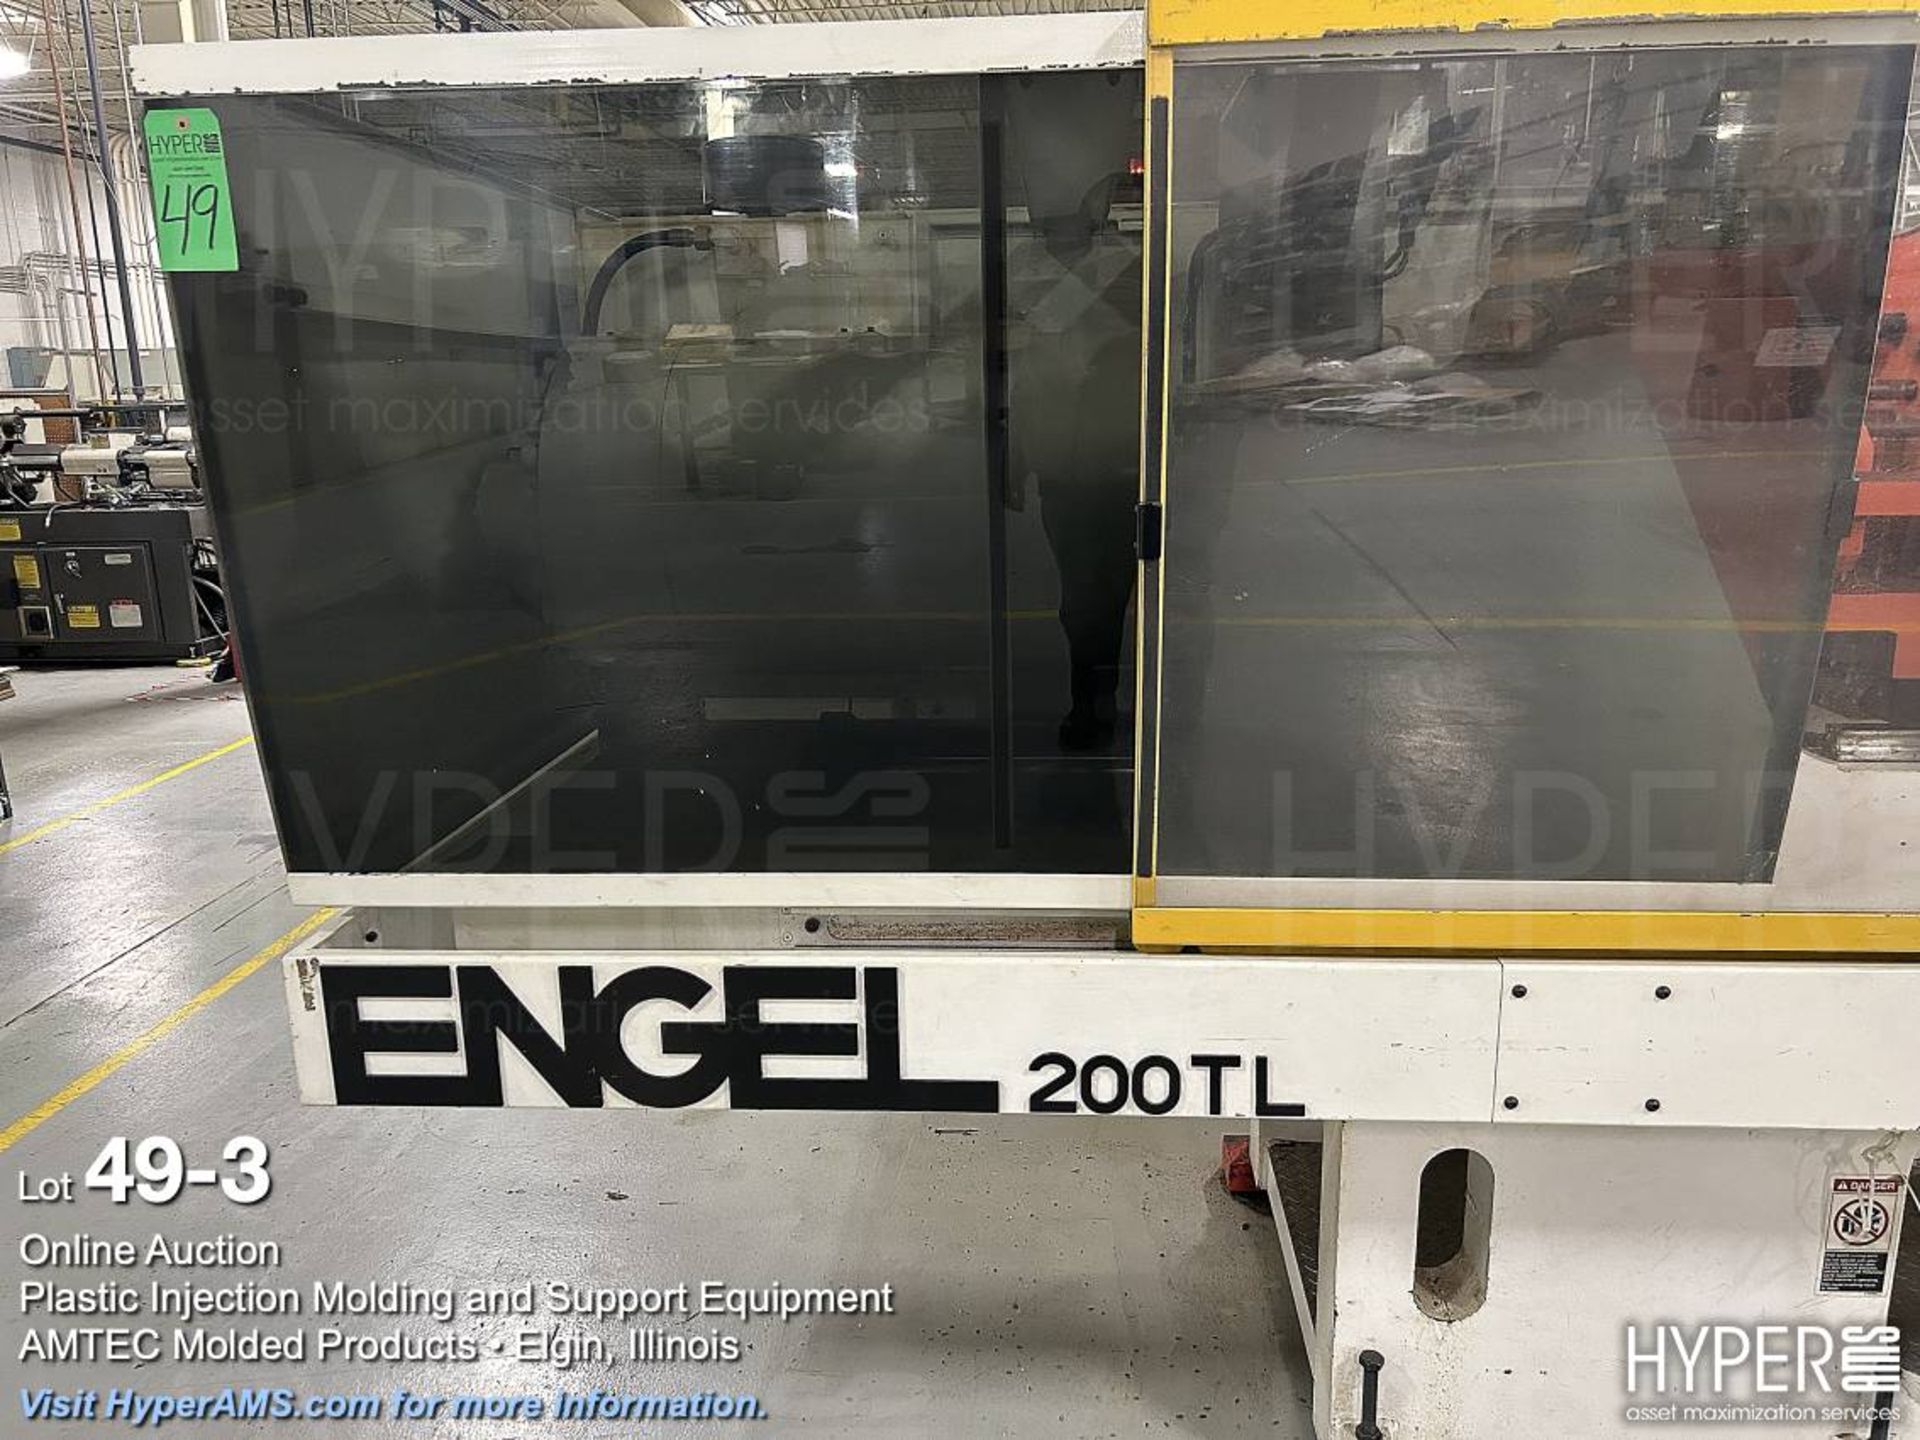 Engel ES1050/200TL toggle clamp plastic injection molding machine - Image 3 of 24